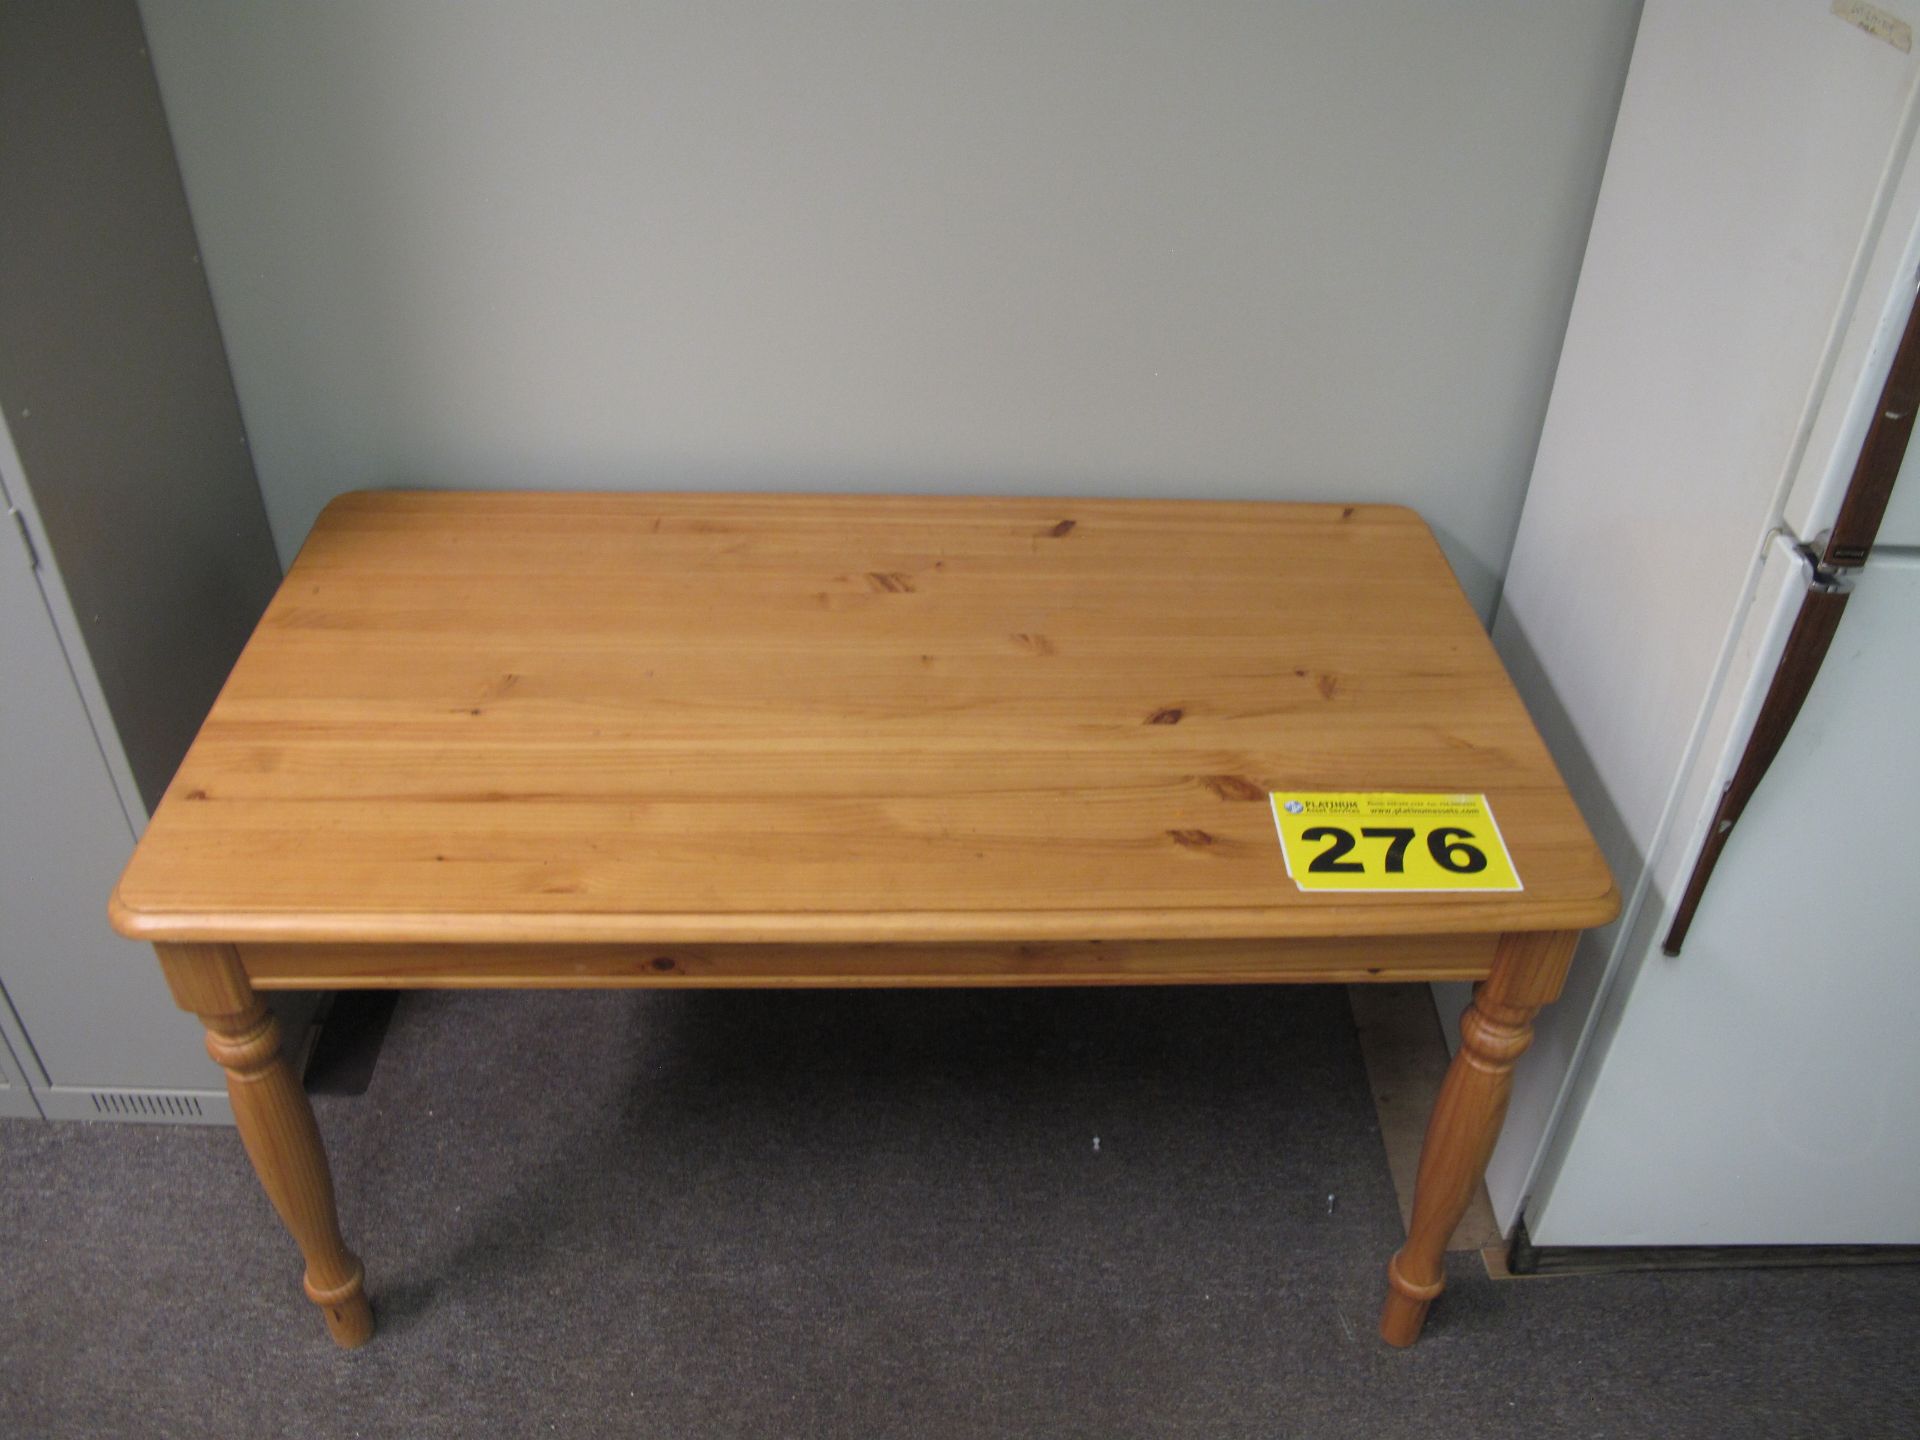 LUNCH ROOM, 5', WOODEN TABLE